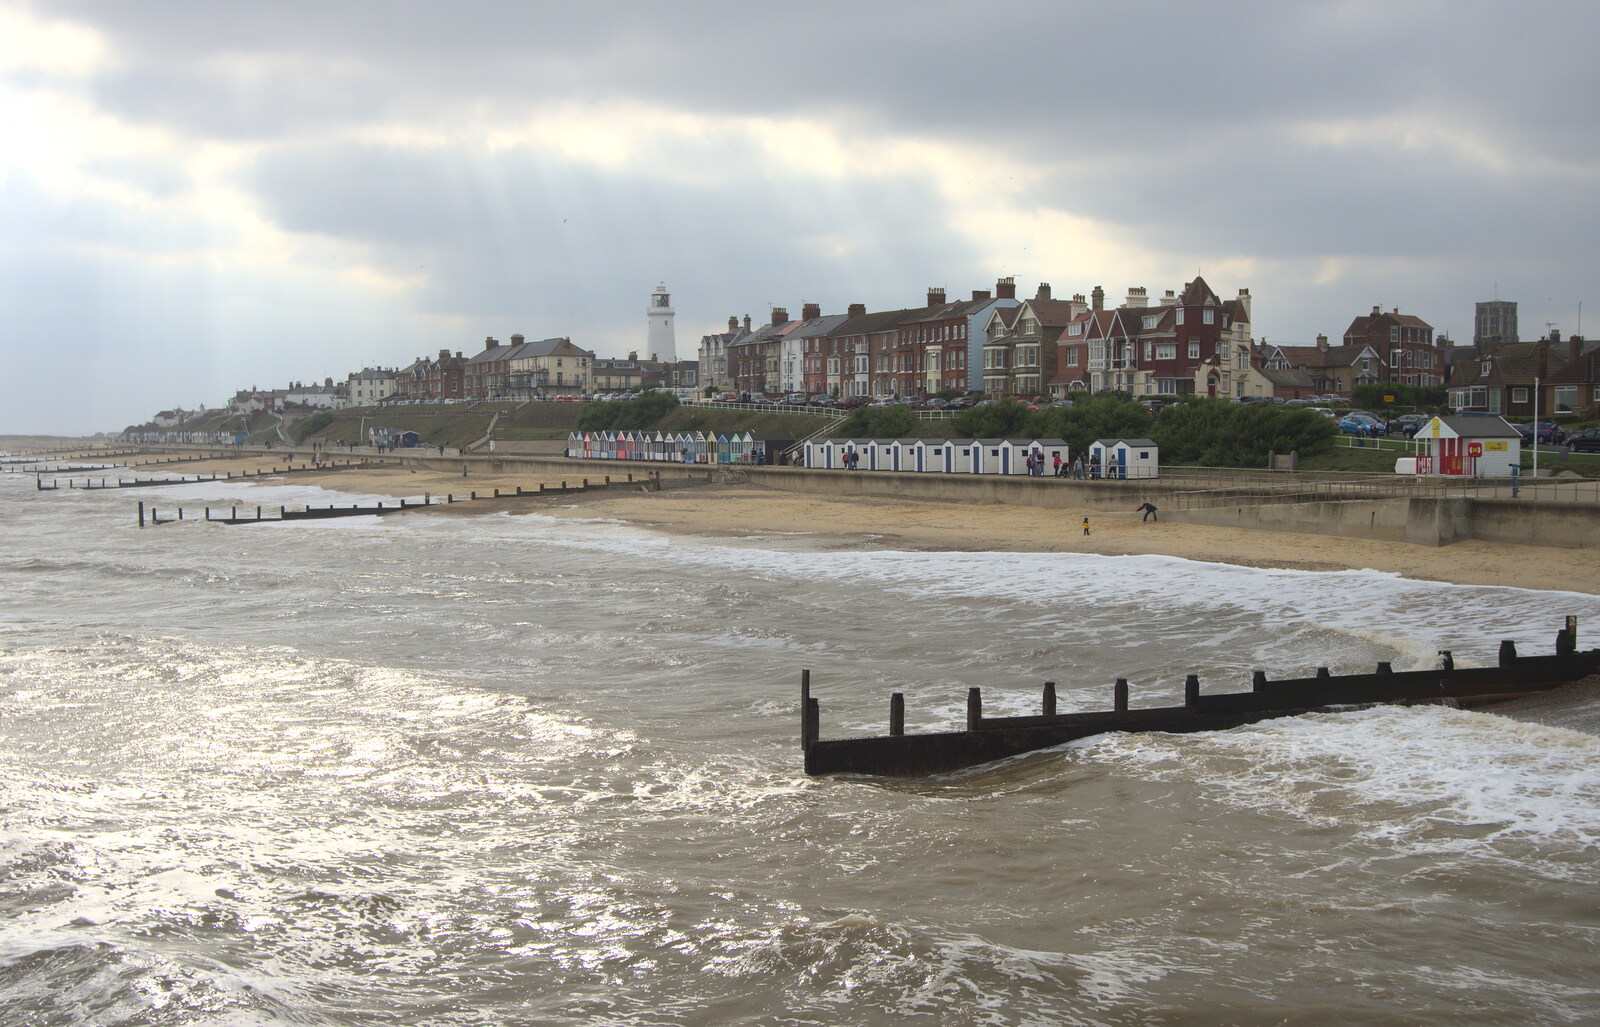 A classic photo of Southwold from the pier from Southwold By The Sea, Suffolk - 29th September 2013